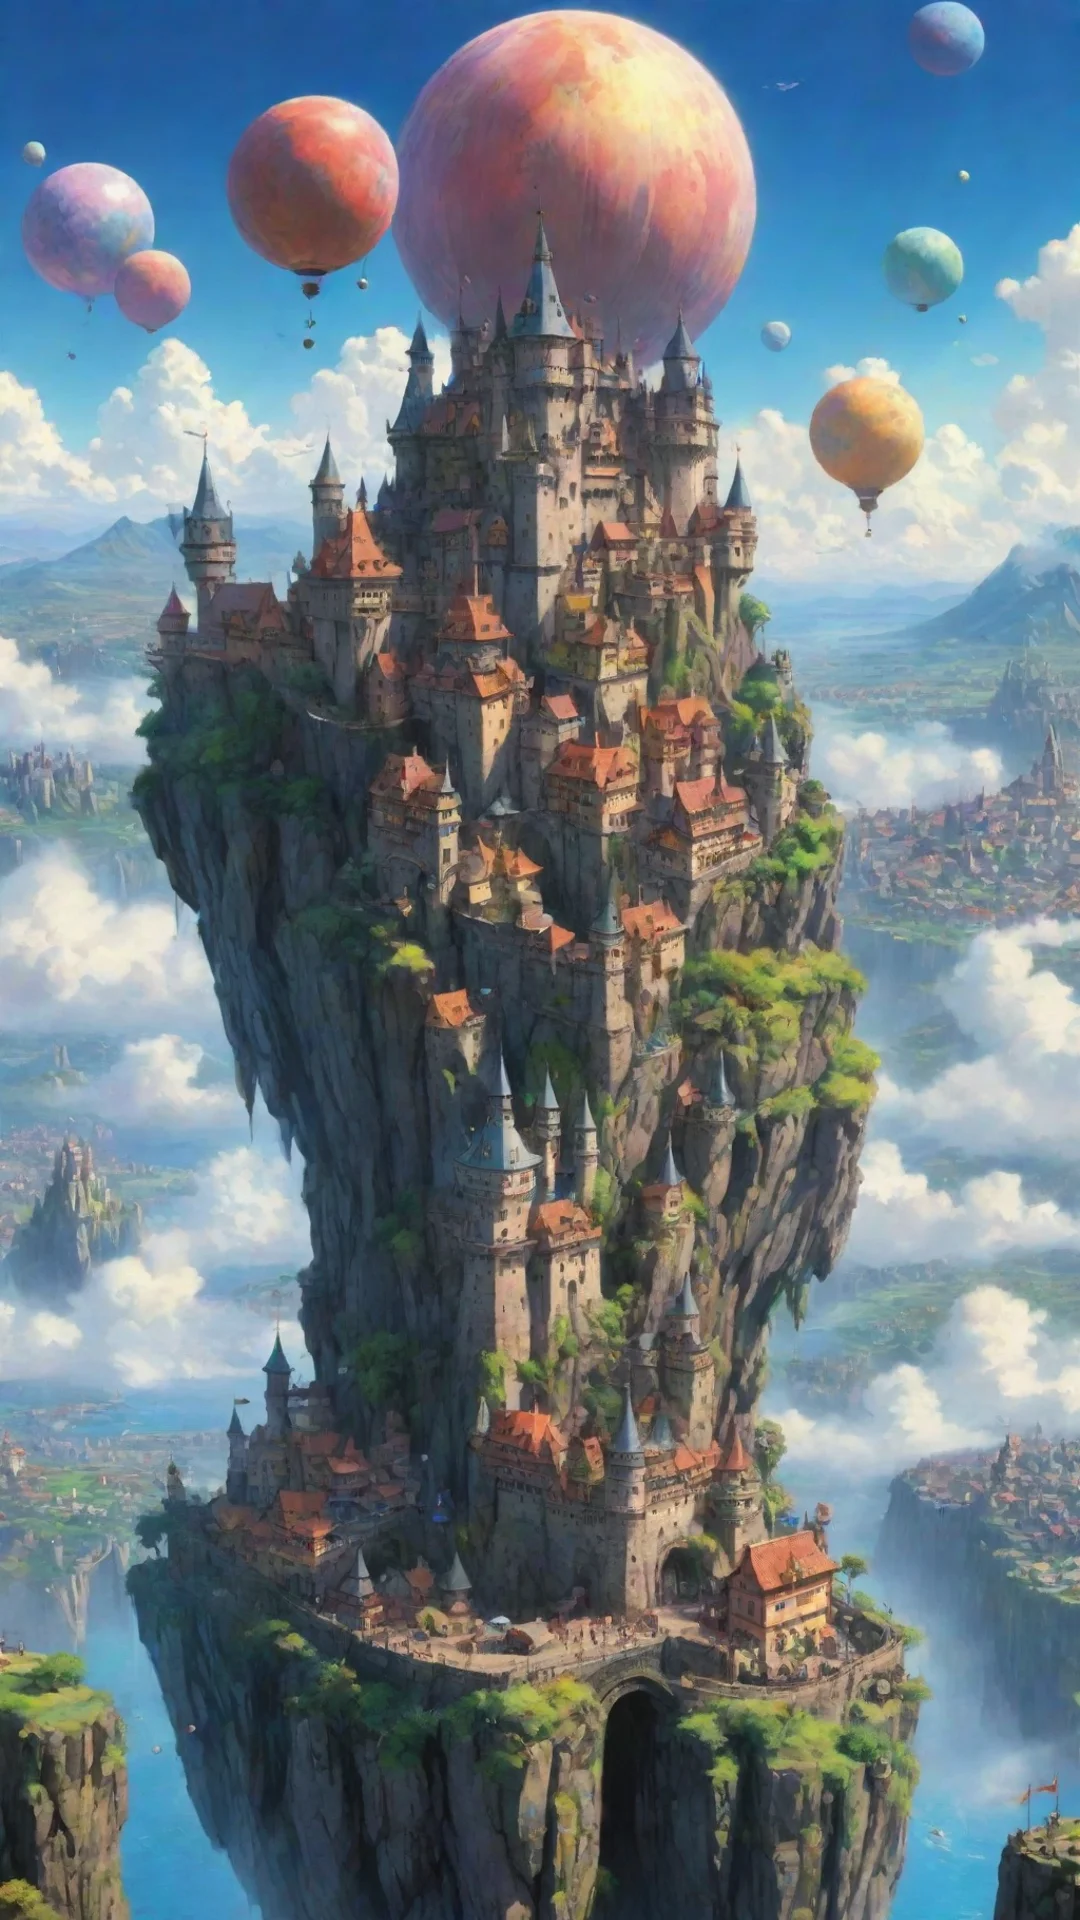 aiartstation art fantasy art ghibli miyazaki hd best quality aesthetic flying castle colorful planets city fortress  confident engaging wow 3 tall